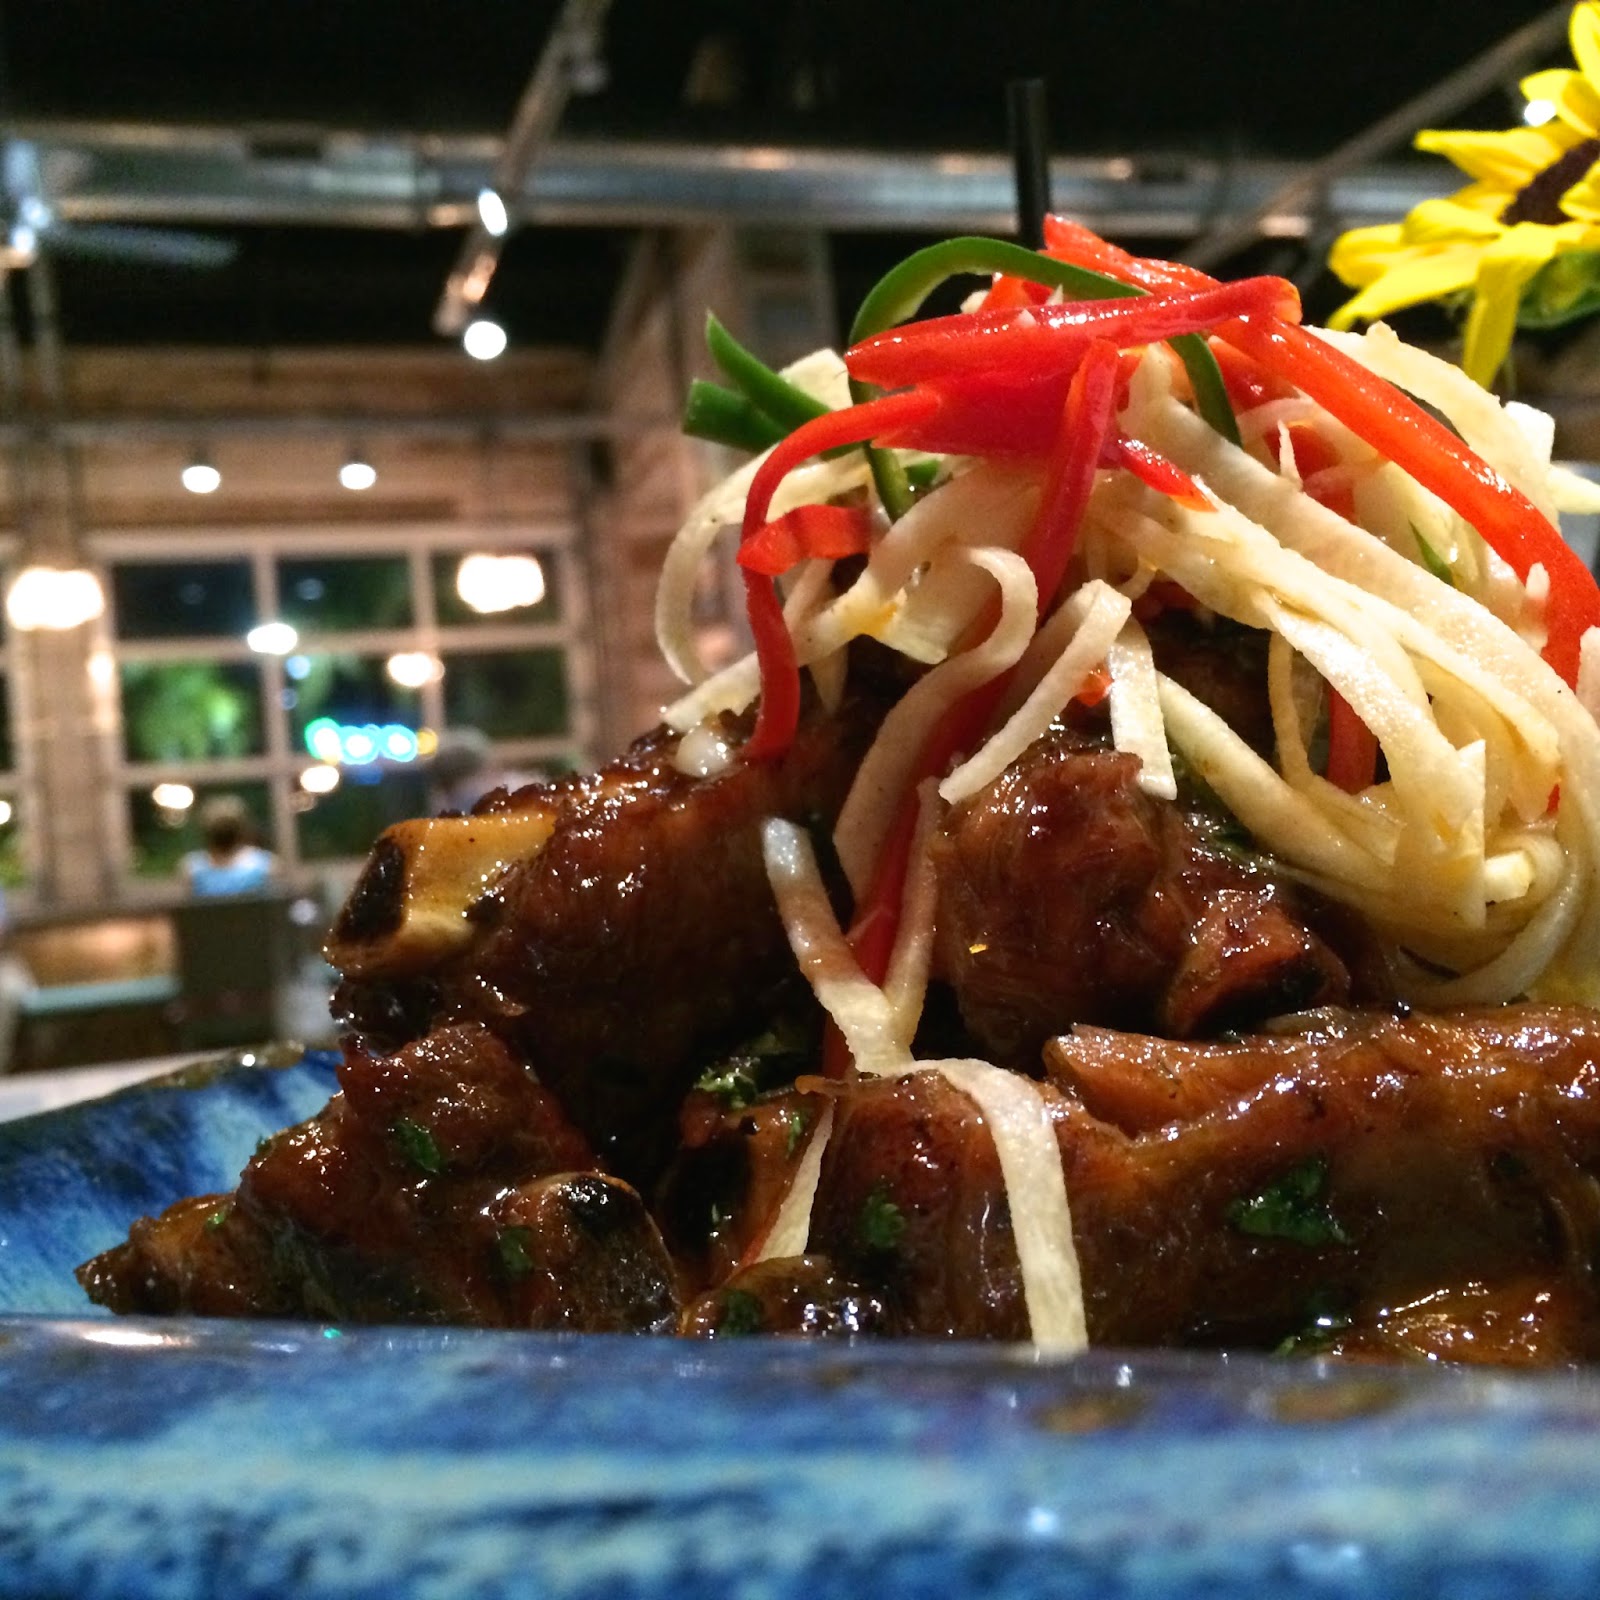 Braised Sticky Sweet Pork Ribs topped with Homemade Jicama Slaw served over Cheese Grits